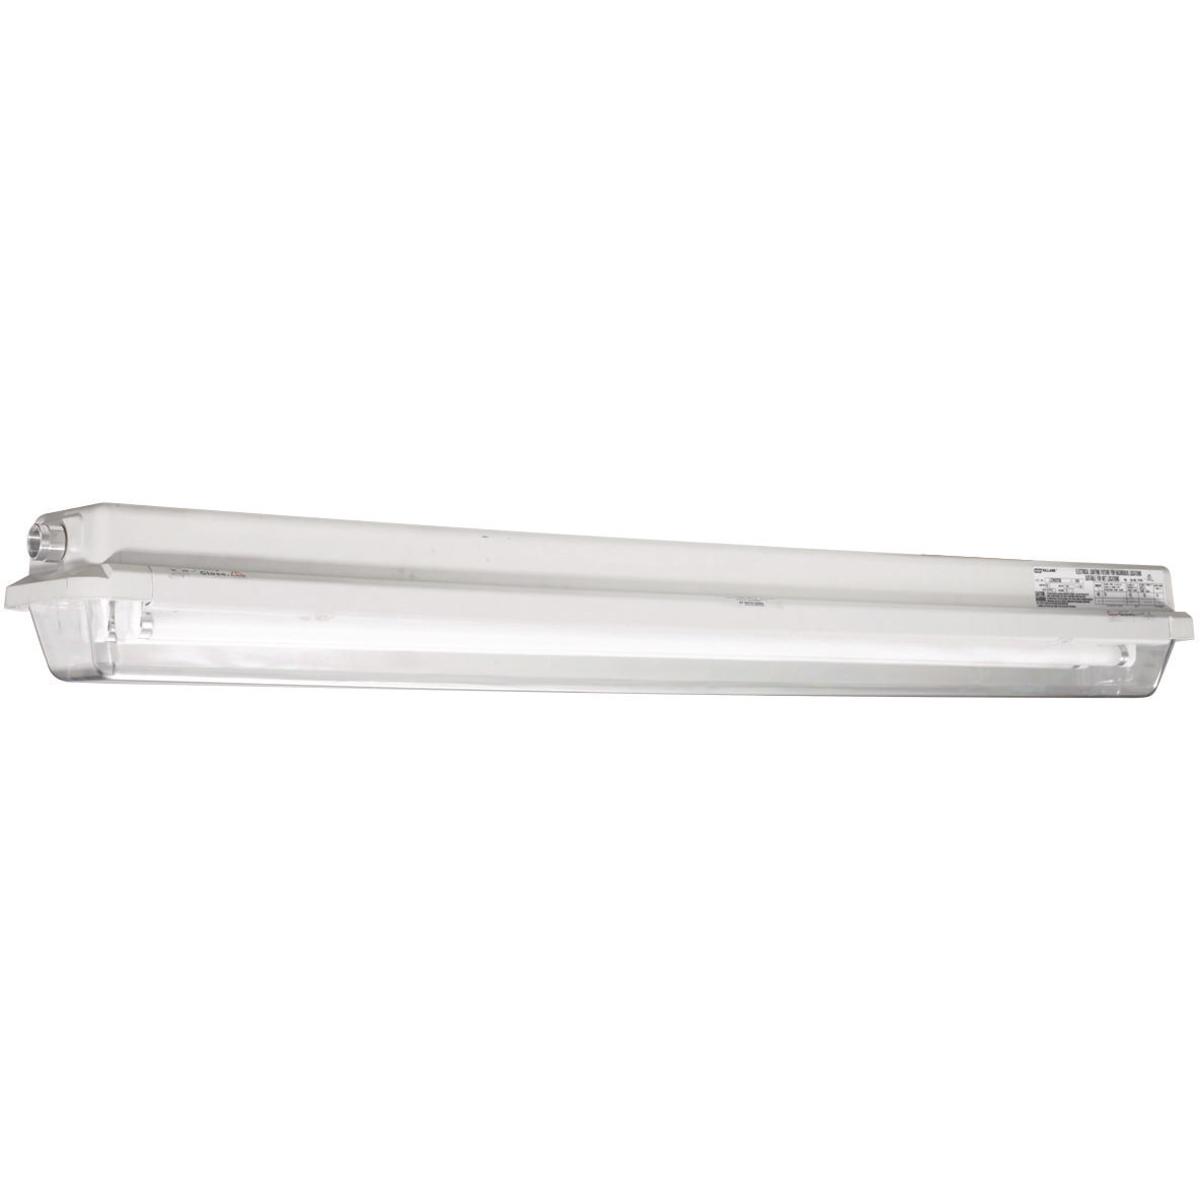 Hubbell LZ2N32315 LZ2N Series- 32W 347V - 4' 3-Lamp T8 - Electronic 50/60 Hz 0°F Start Medium Bi-Pin  ; Lexan® Clear Lens, impact resistant polycarbonate ; Housing-one piece fiberglass reinforced polyester, NEMA 4X & IP66 rated. ; Two 3/4” NTP aluminum hubs - one at each e